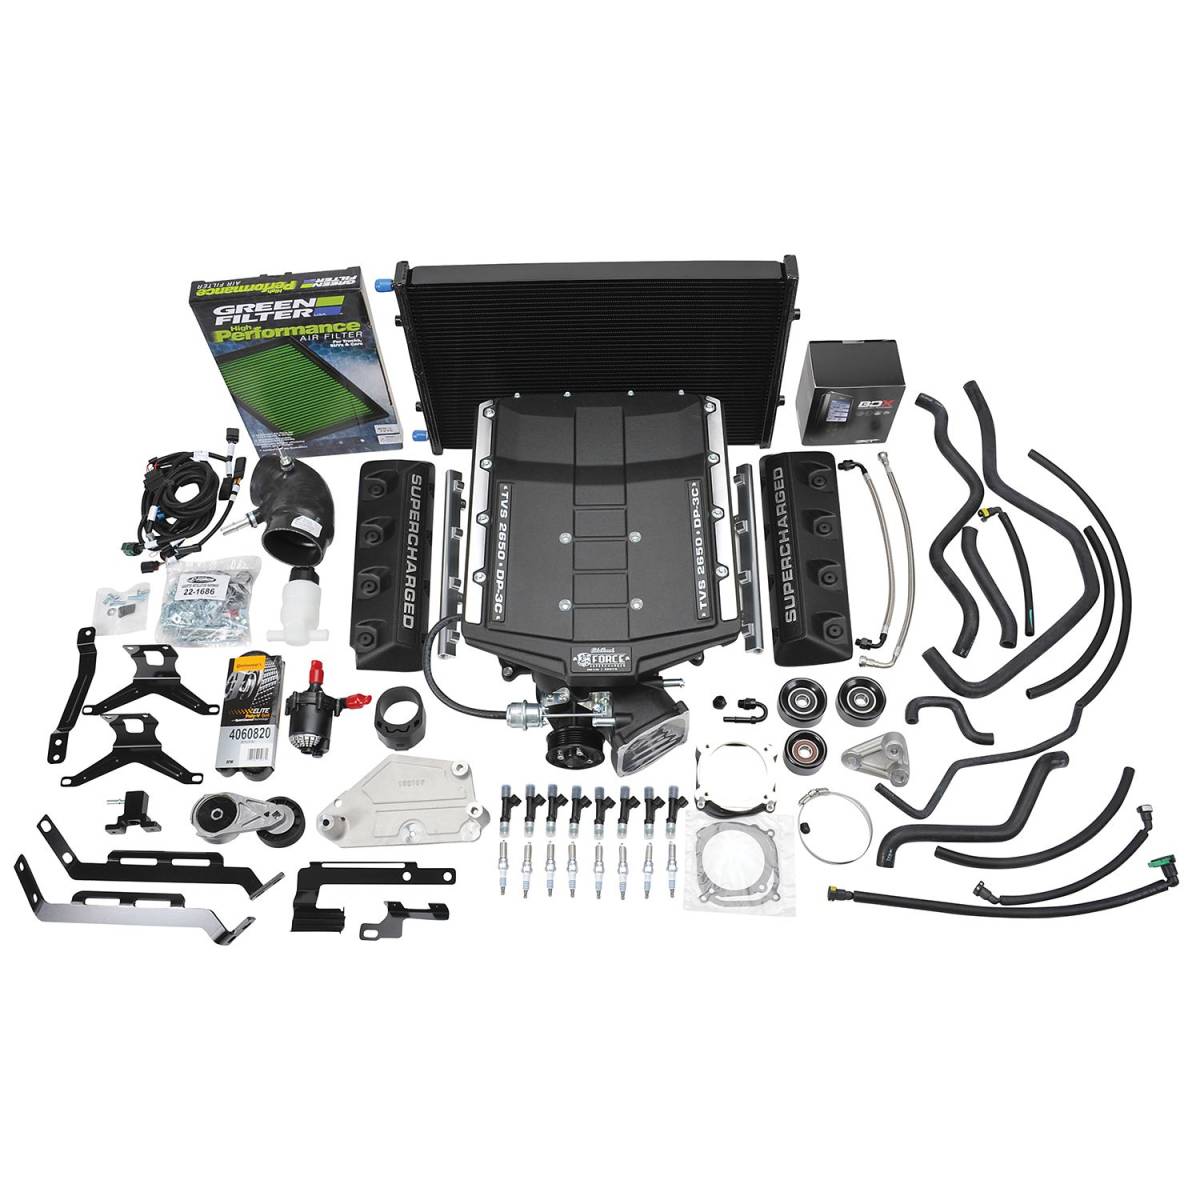 Edelbrock - Ford Mustang 5.0L 2015-2017 Edelbrock Stage 1 Complete Supercharger Intercooled Kit With Tune - Image 1